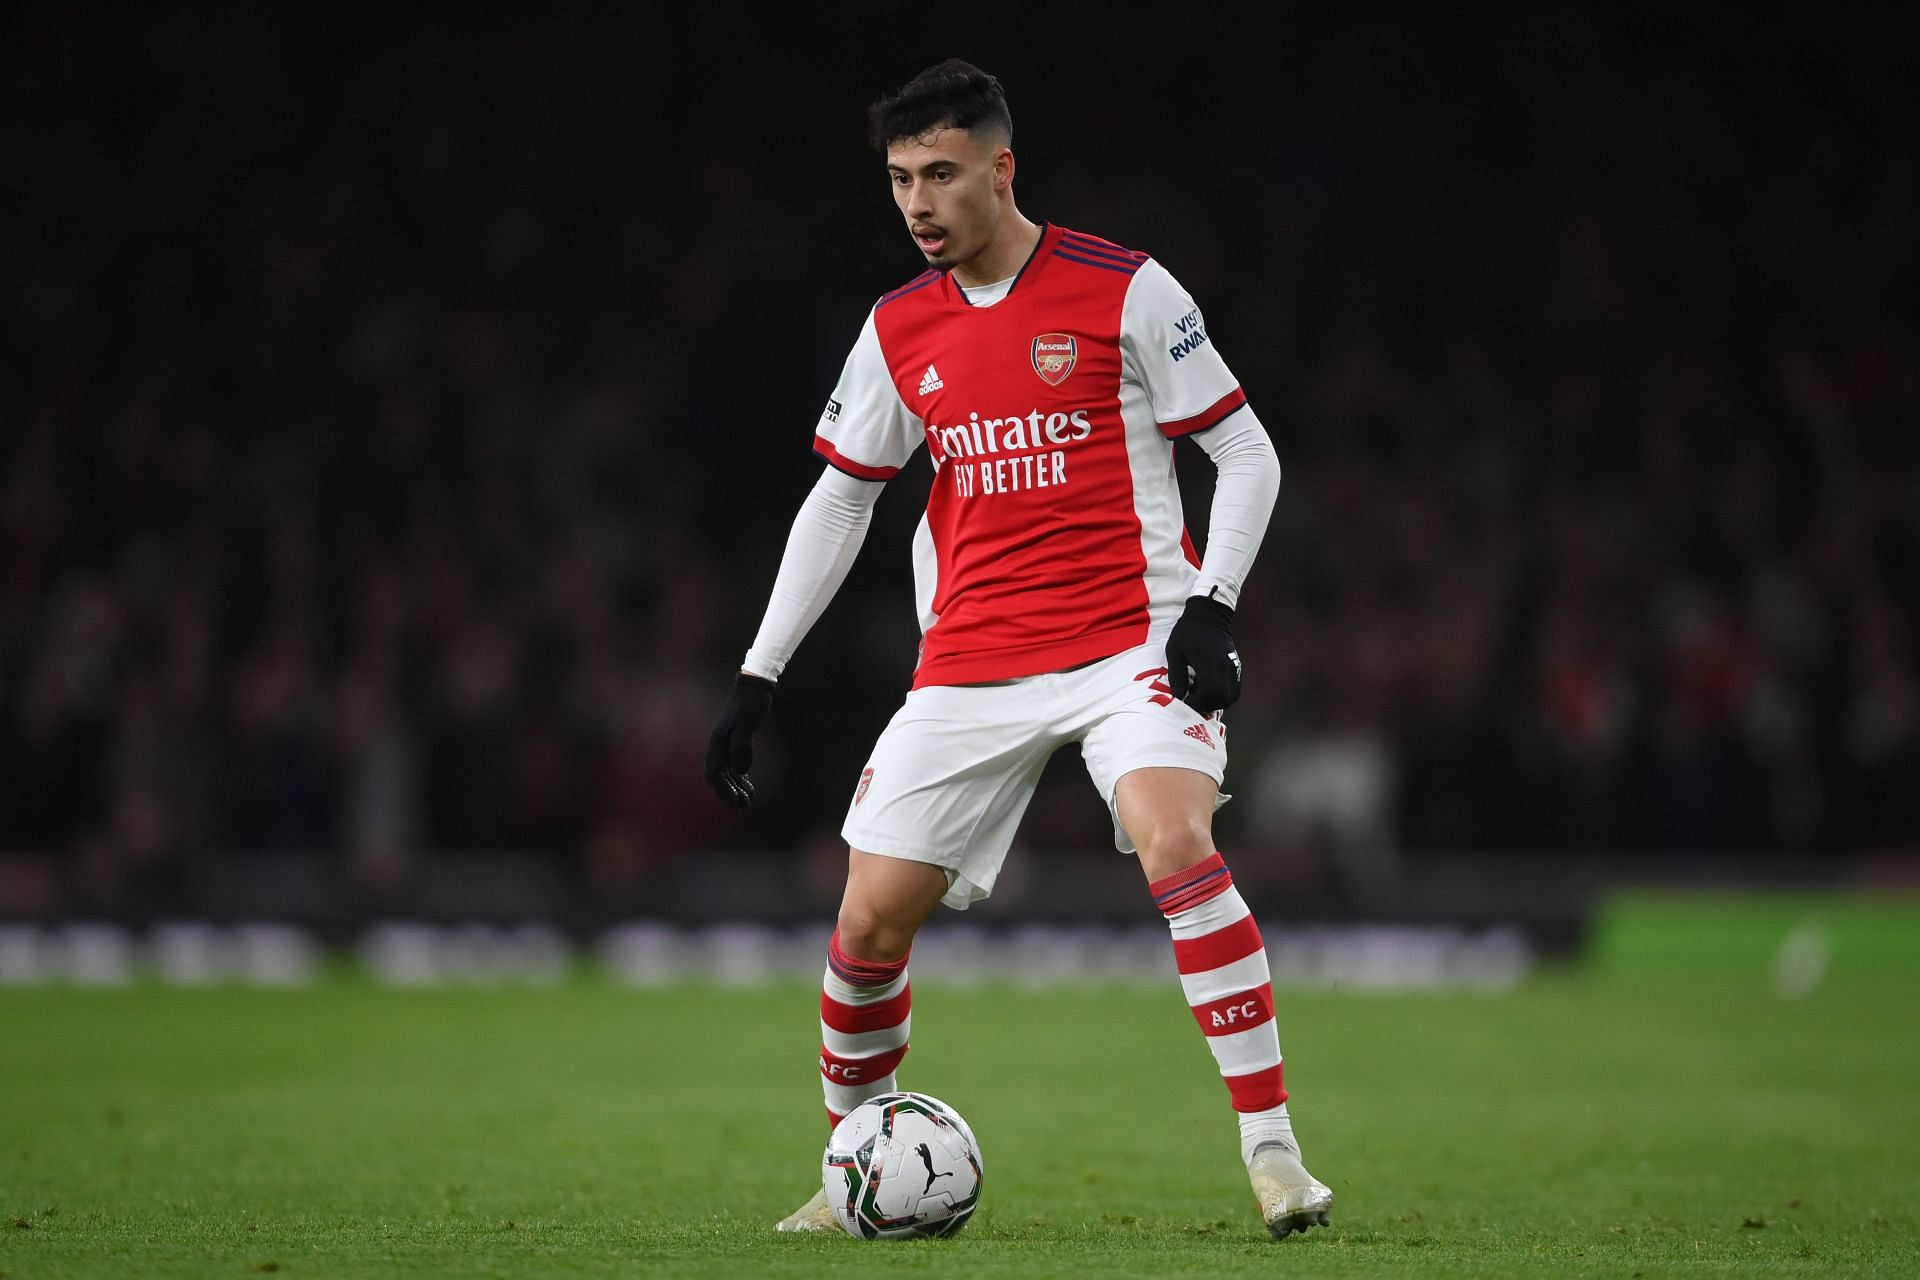 The attacker switched to the Emirates Stadium in the summer of 2019.